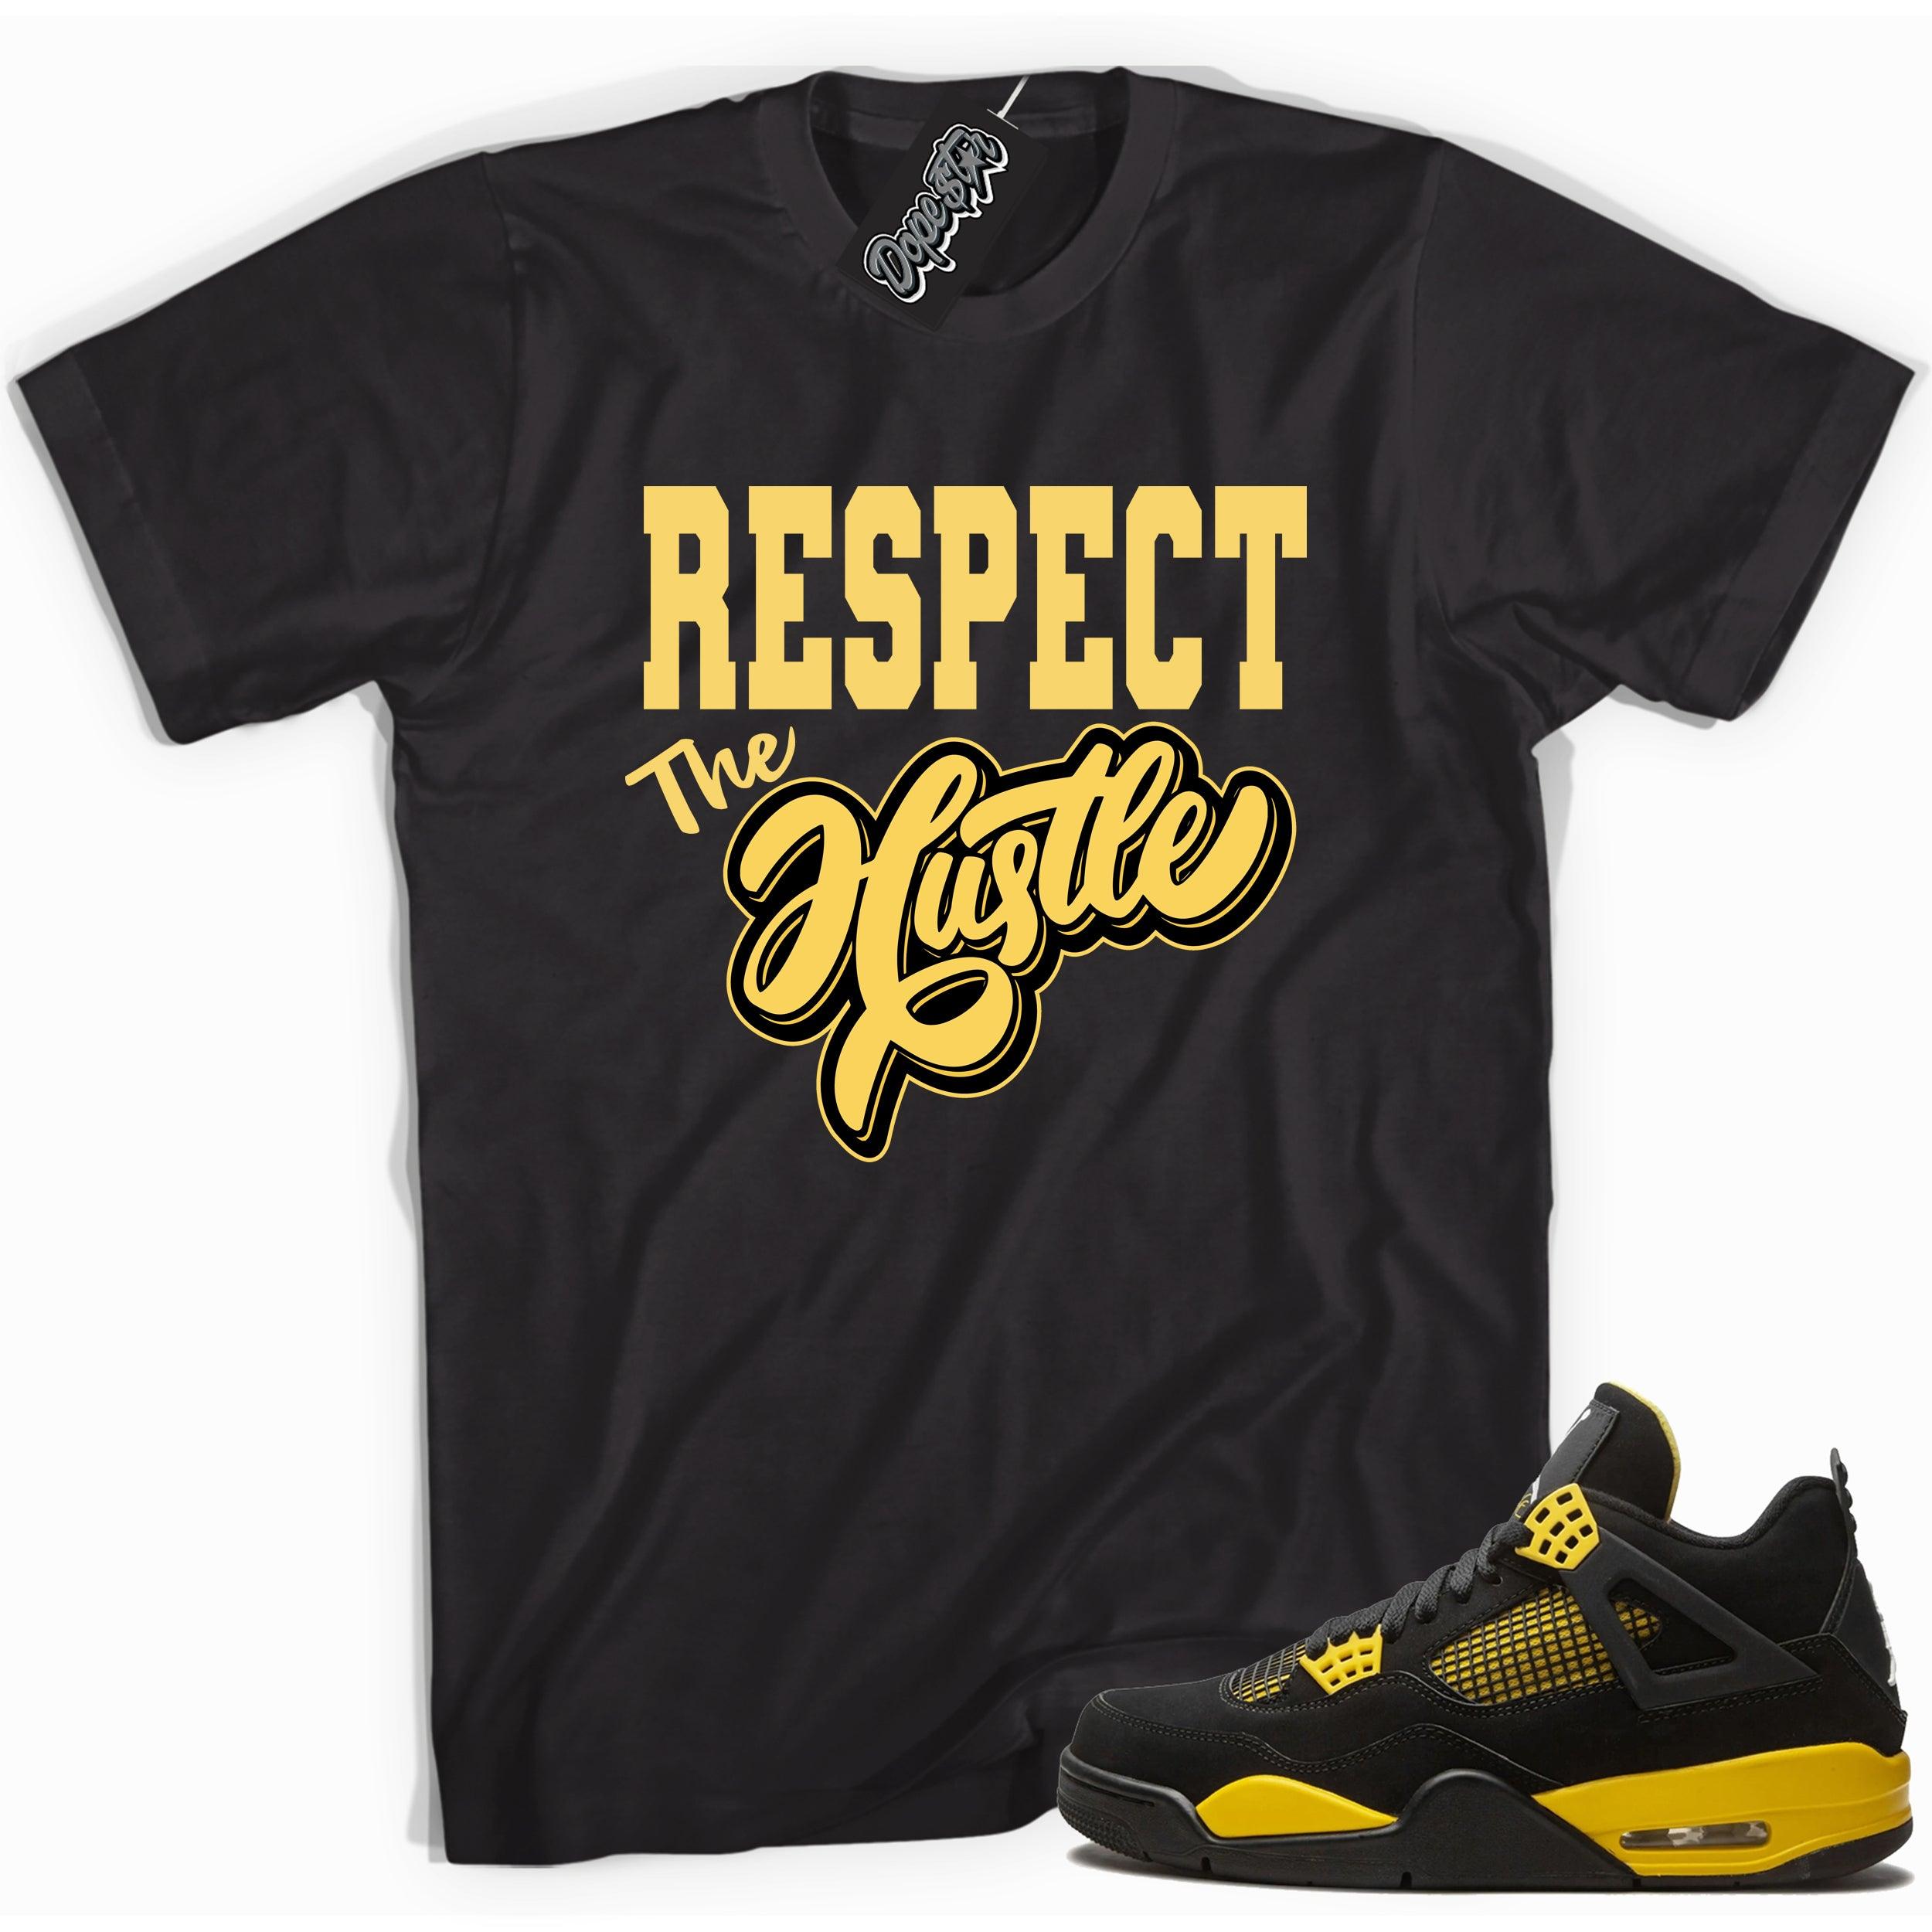 Cool black graphic tee with 'respect the hustle ' print, that perfectly matches  Air Jordan 4 Thunder sneakers